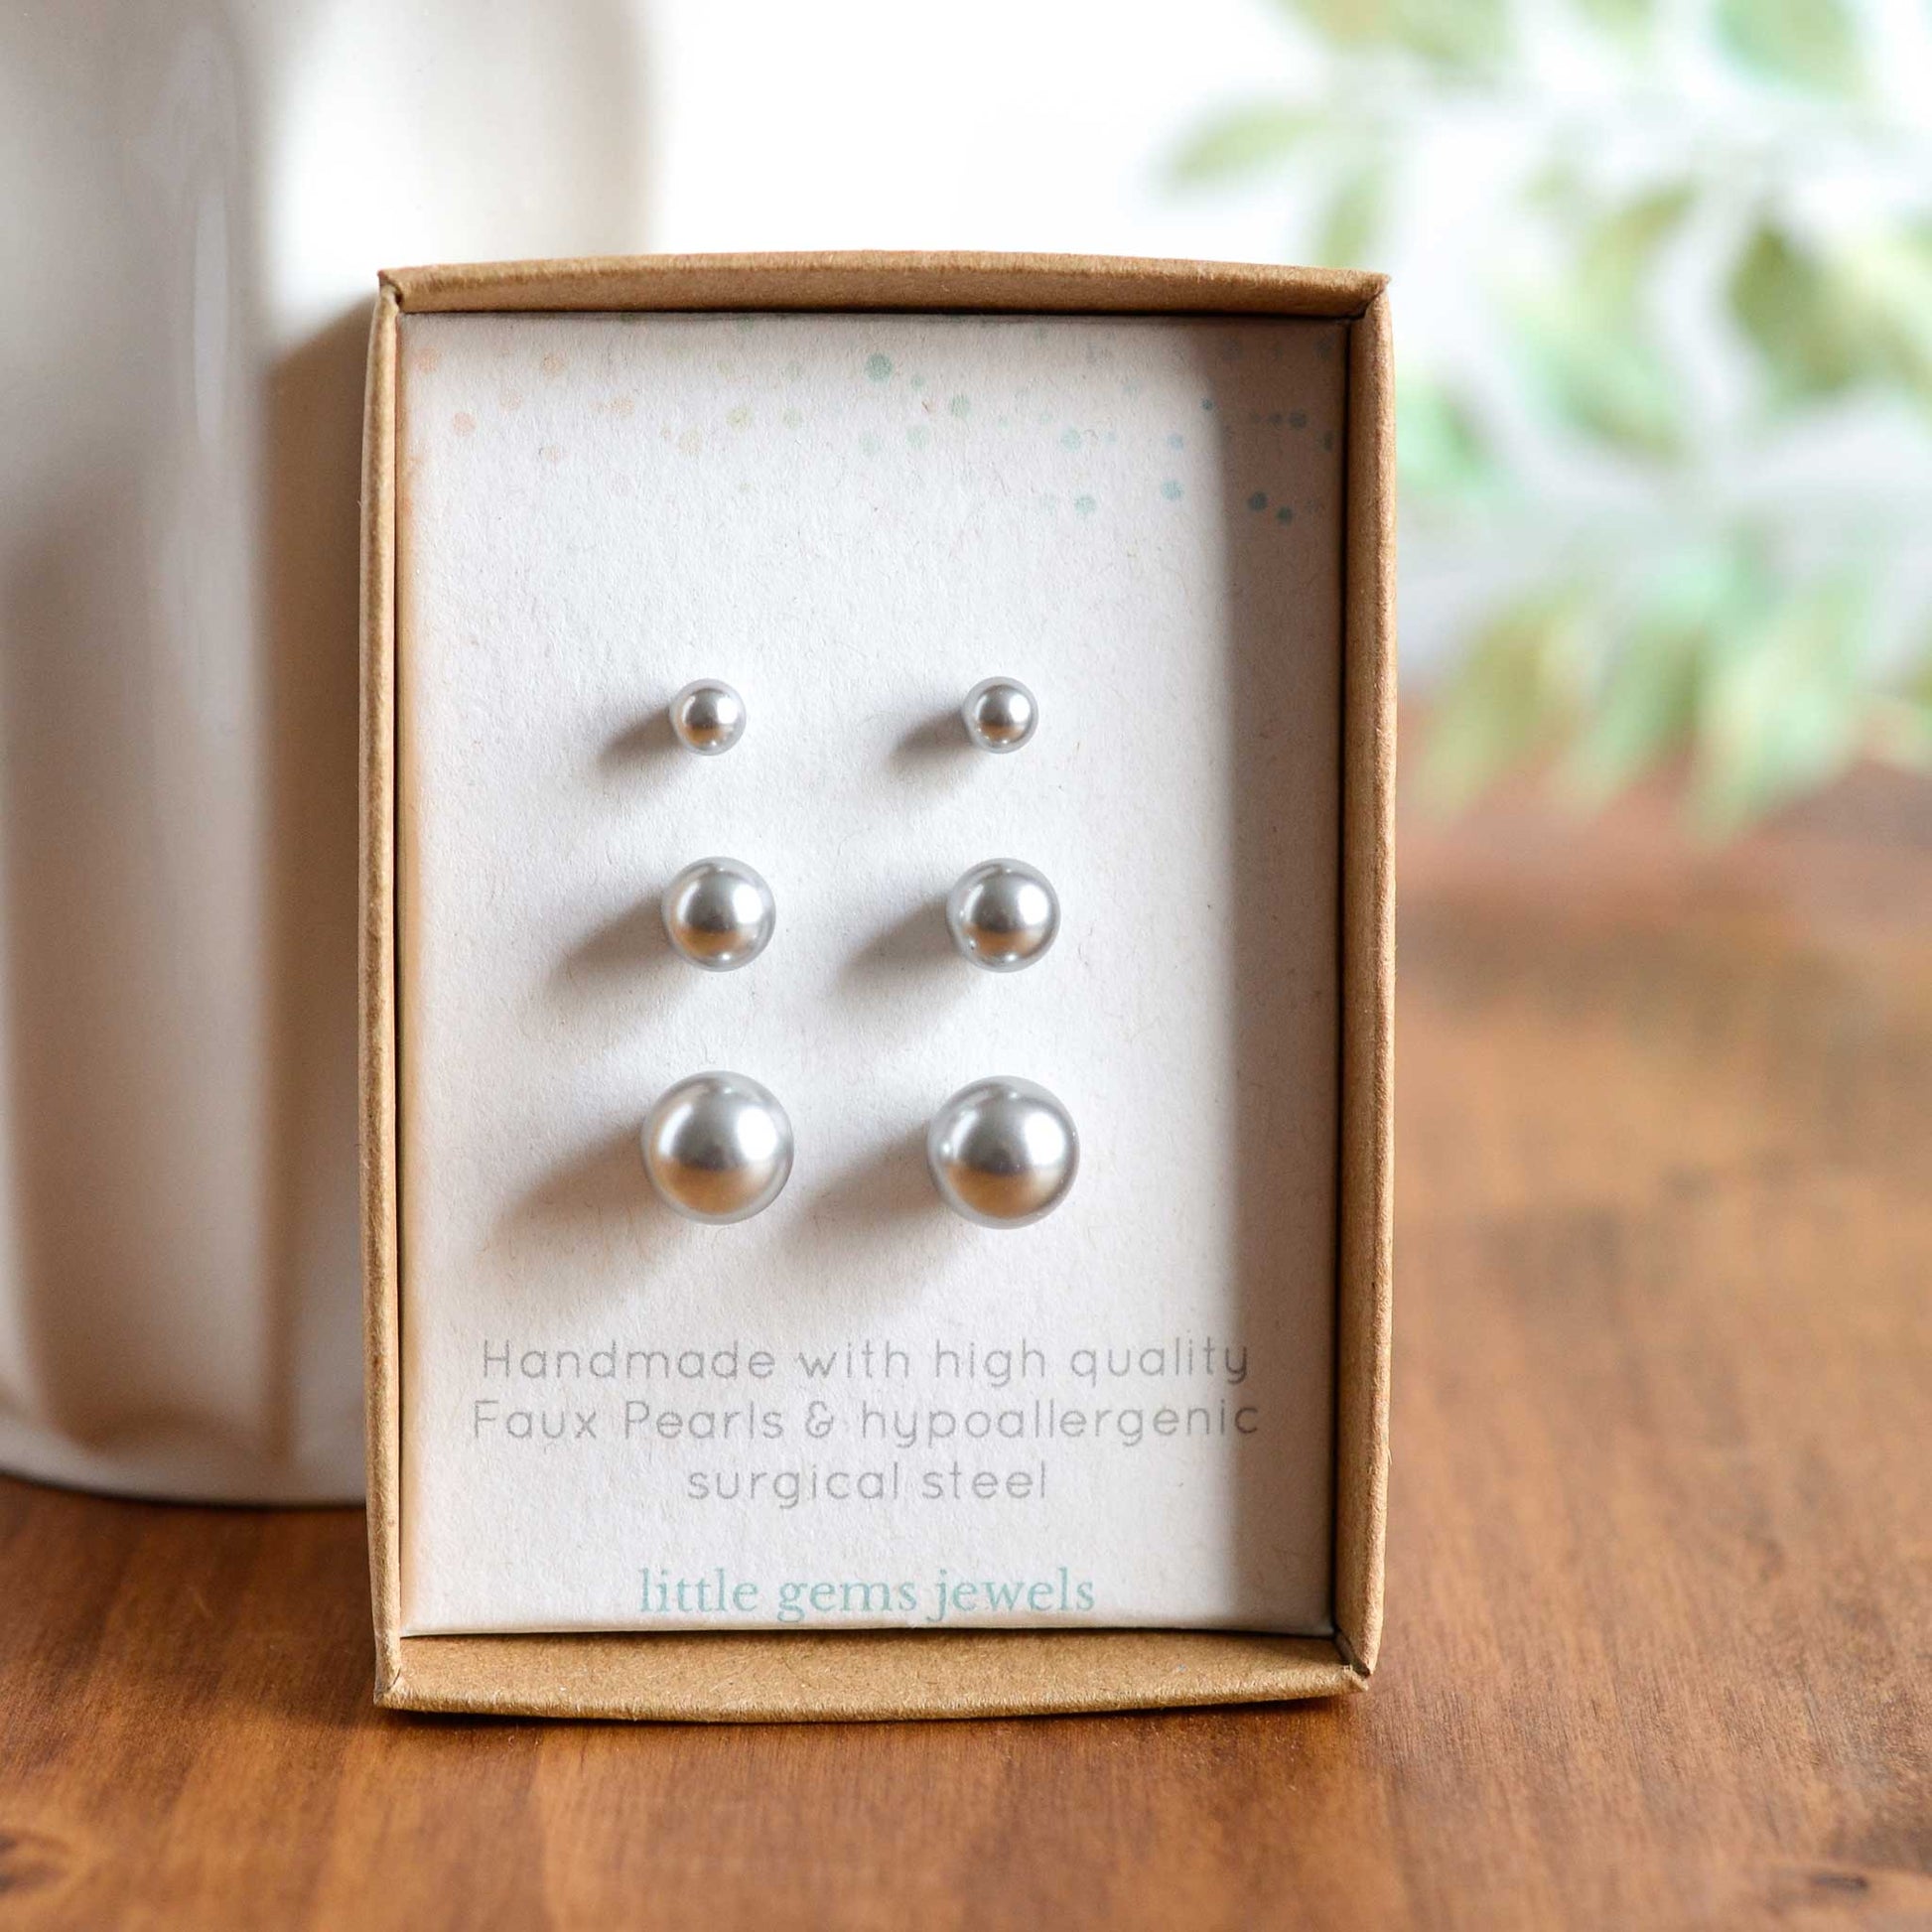 Set of three pale grey faux pearl stud earrings in eco friendly gift box